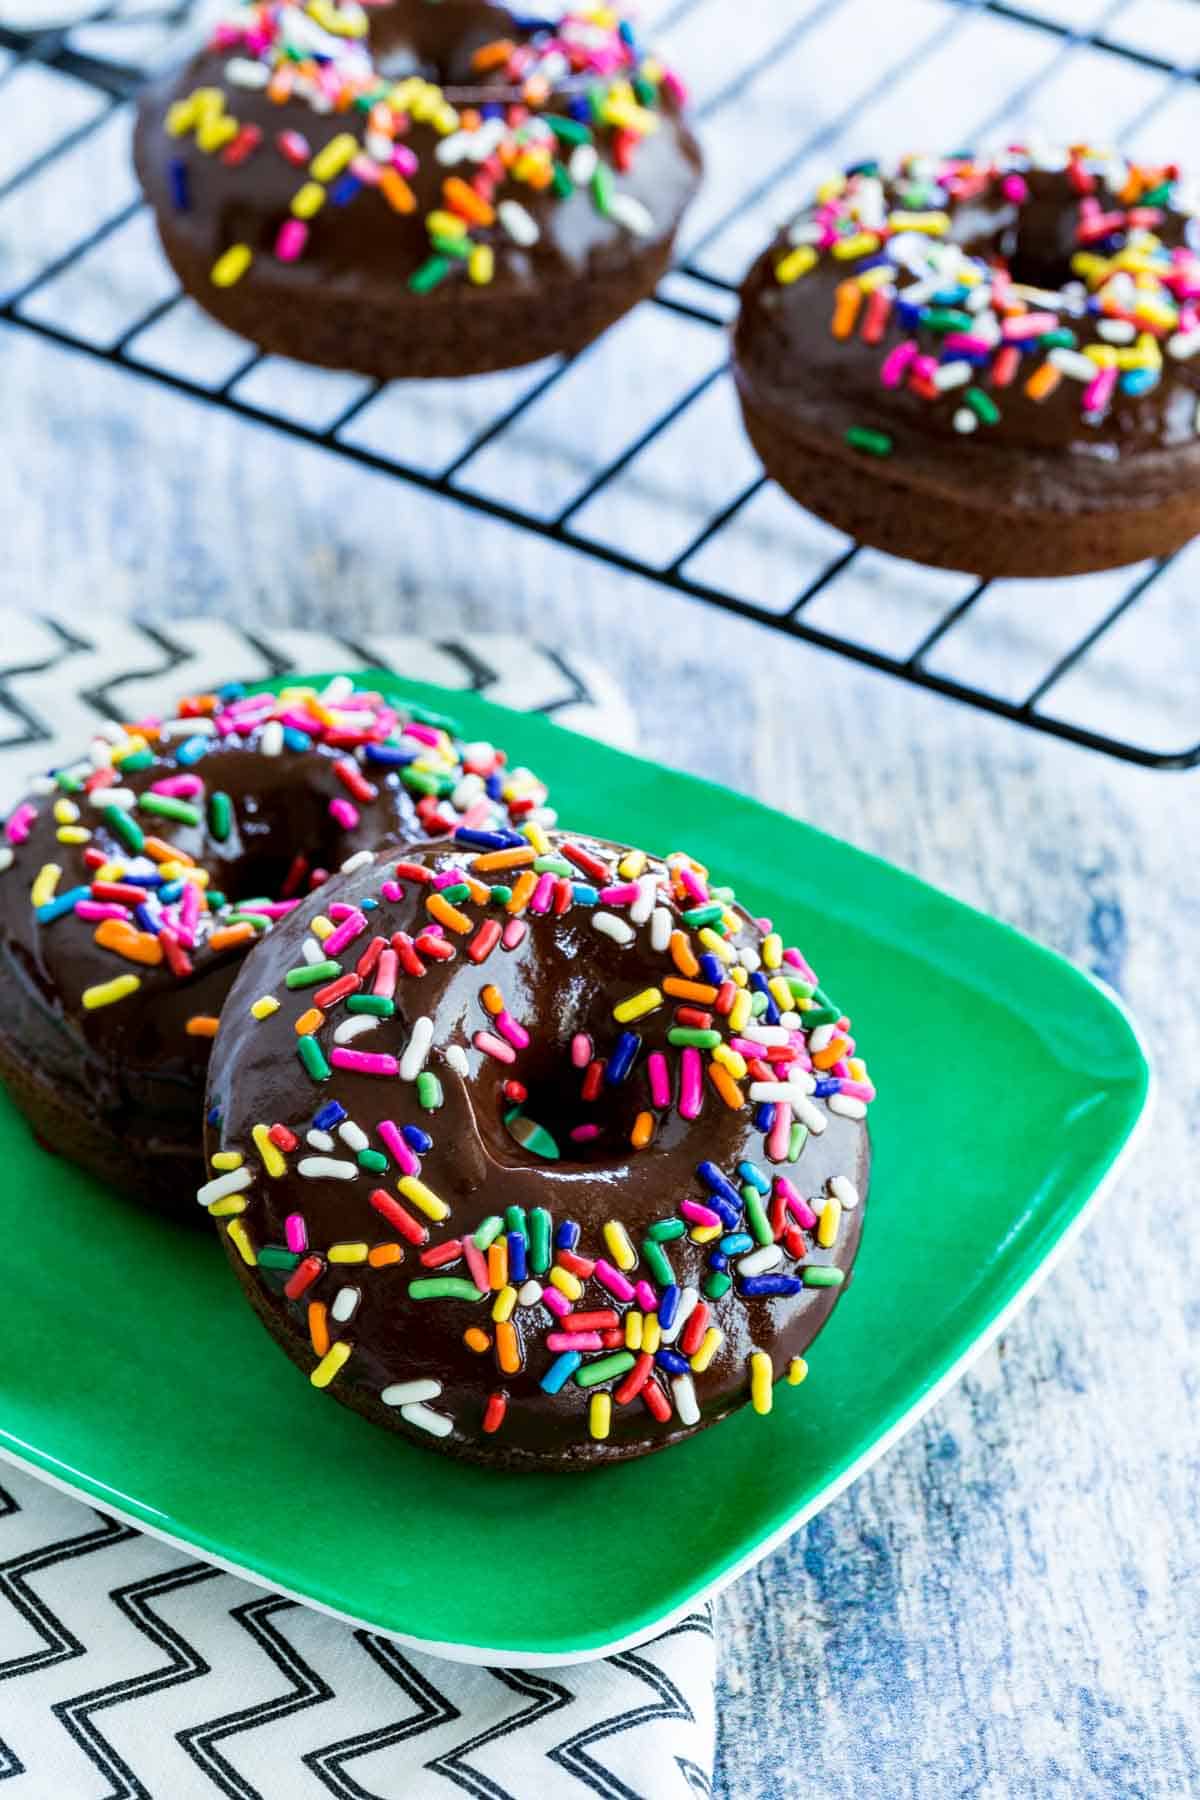 Chocolate-glazed gluten-free chocolate donuts covered in rainbow sprinkles.